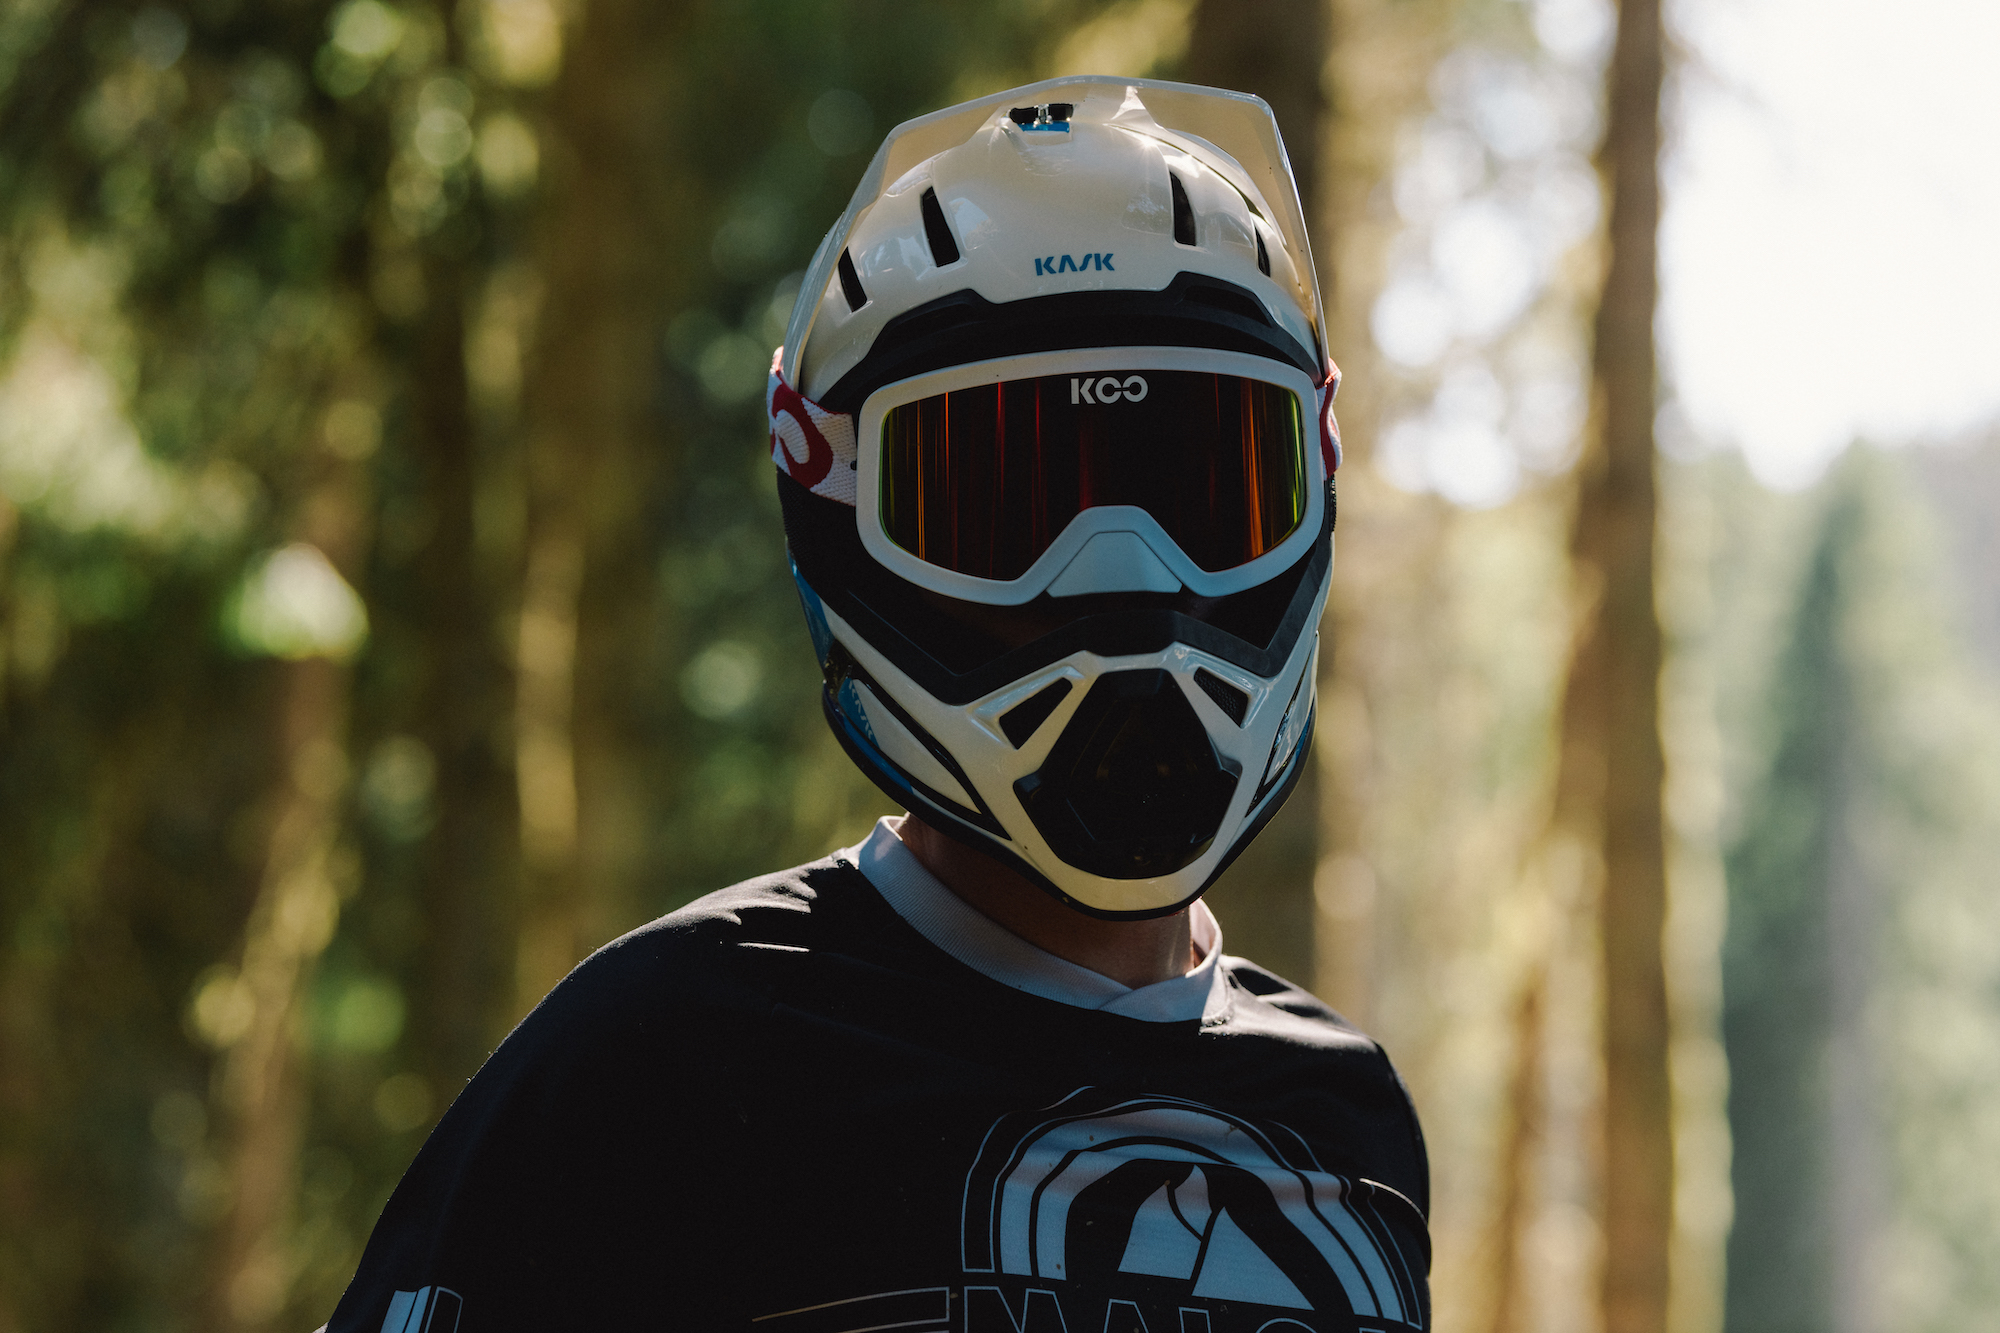 mtb full face helmet with goggles